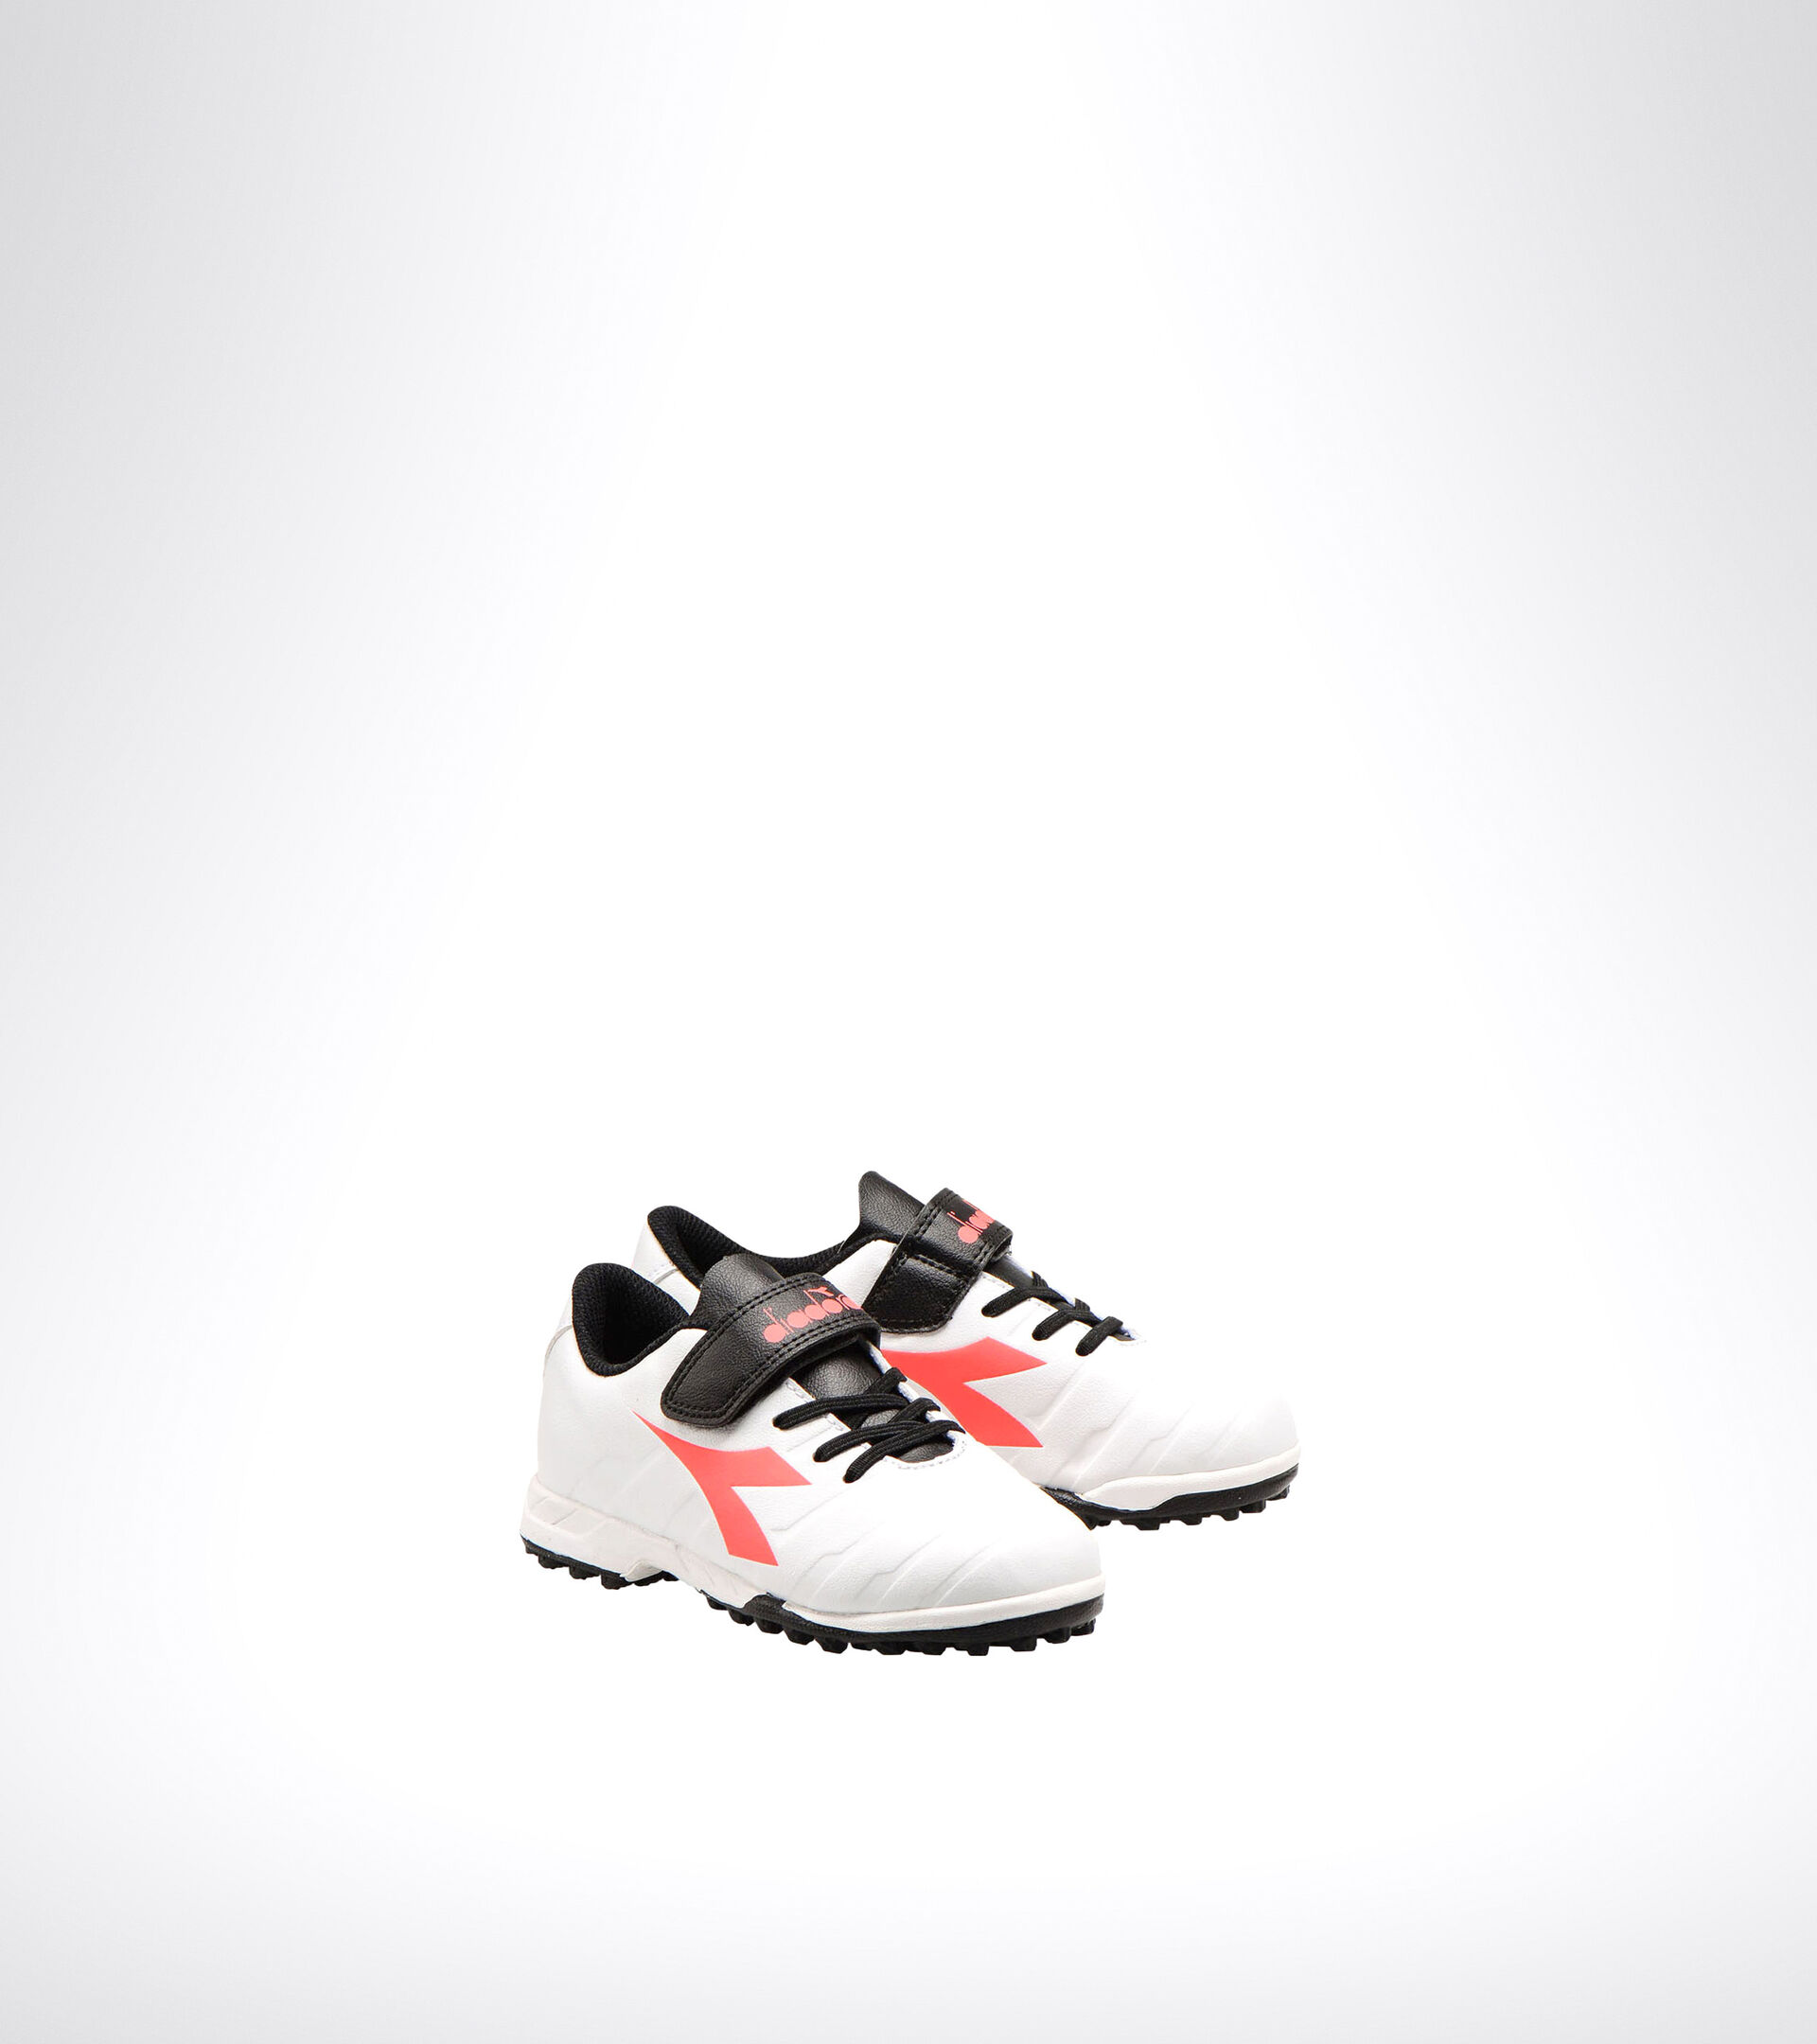 Hard ground and artificial turf football boot - Unisex kids PICHICHI 3 TF JR VE WHITE/BLACK/RED FLUO - Diadora